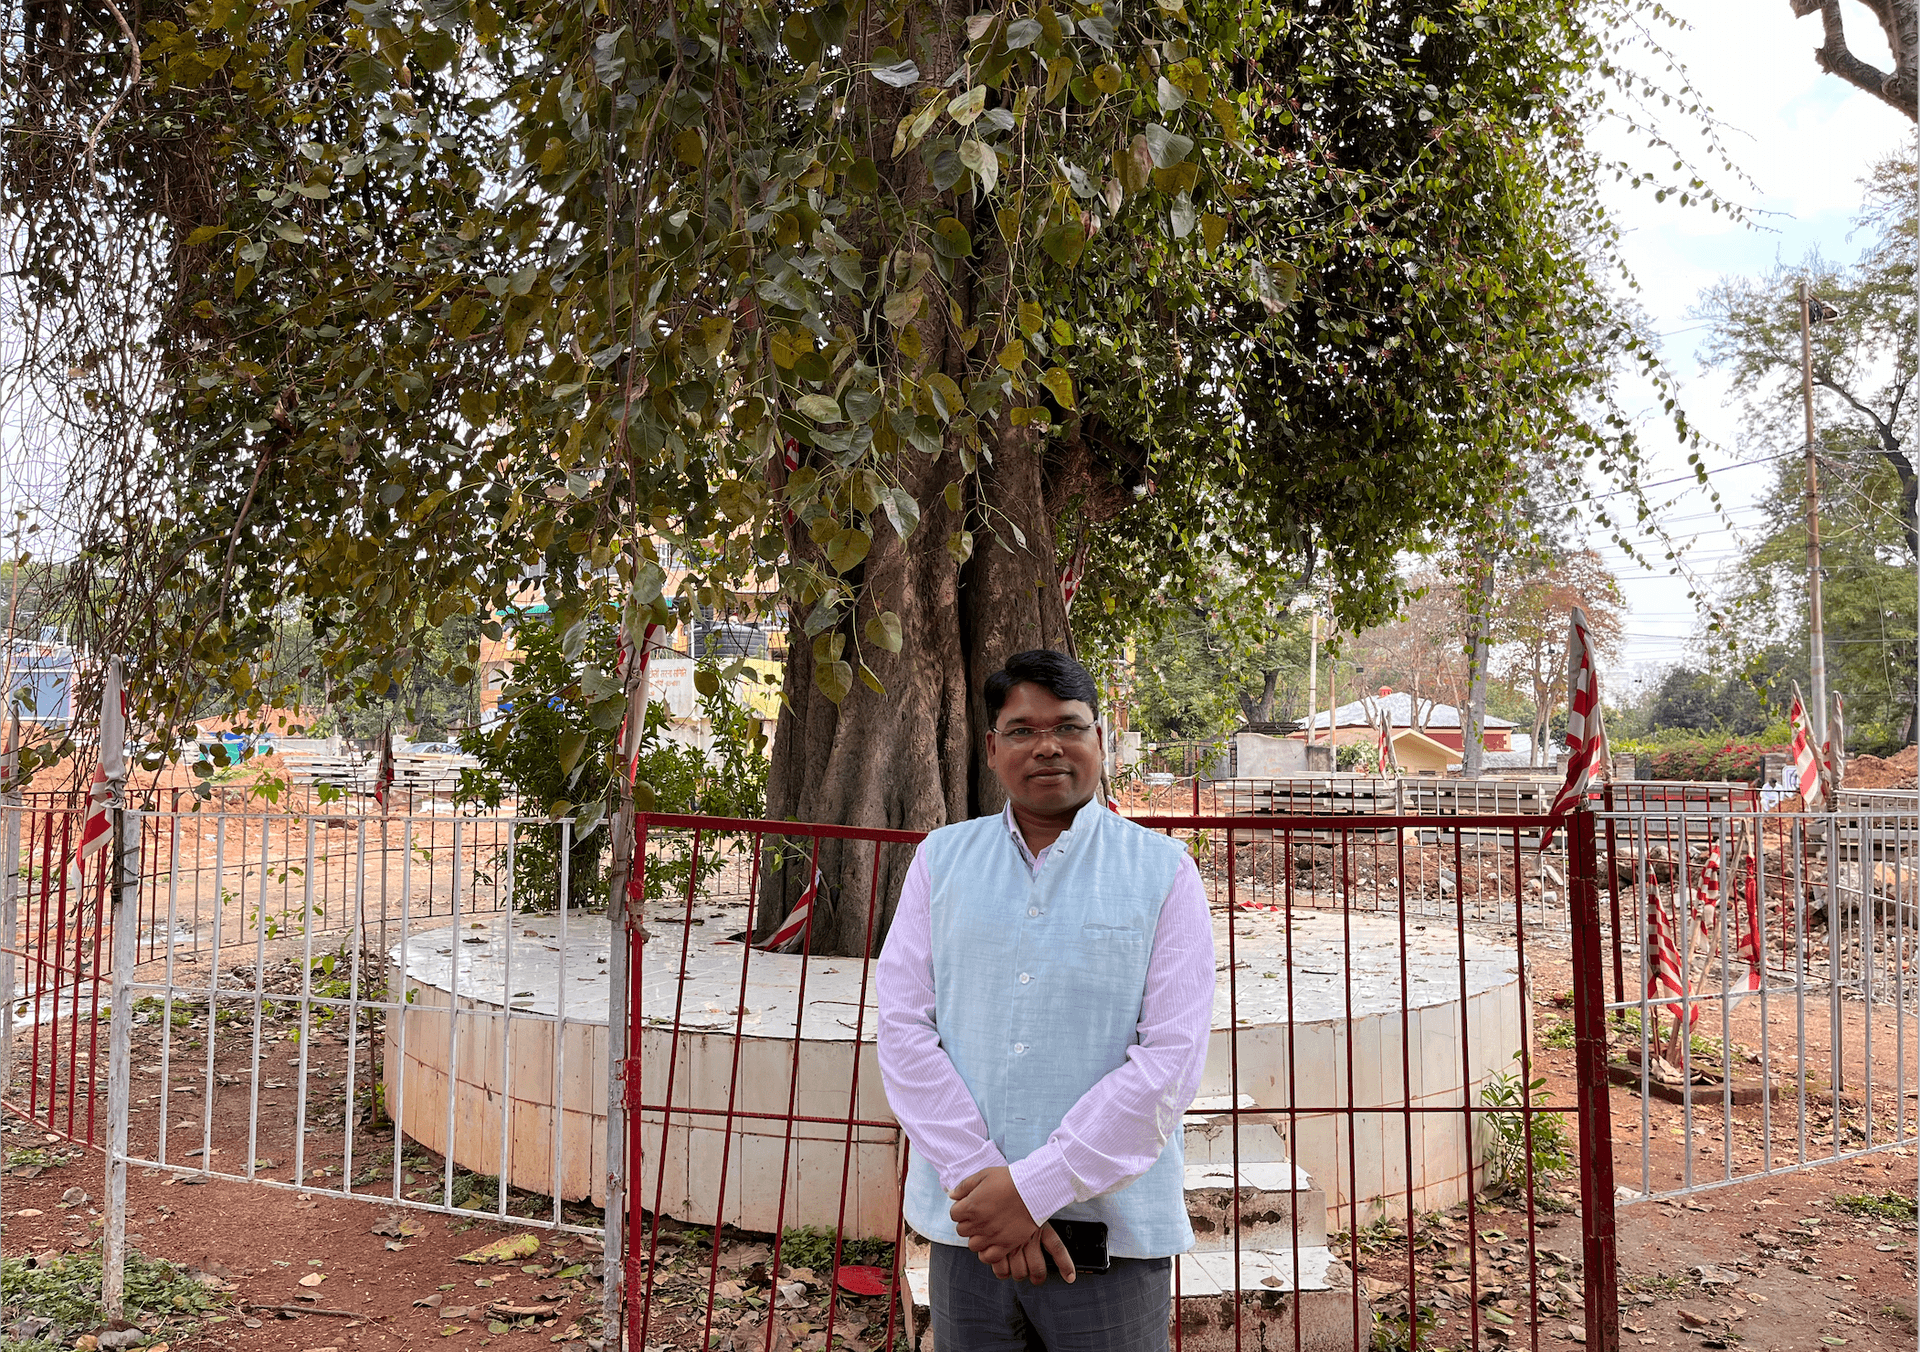 Mathura Kandir, a member of the Mundra tribe, stands in front of a sacred grove in Ranchi, a place of worship for India's Indigenous people, or Adivasis.